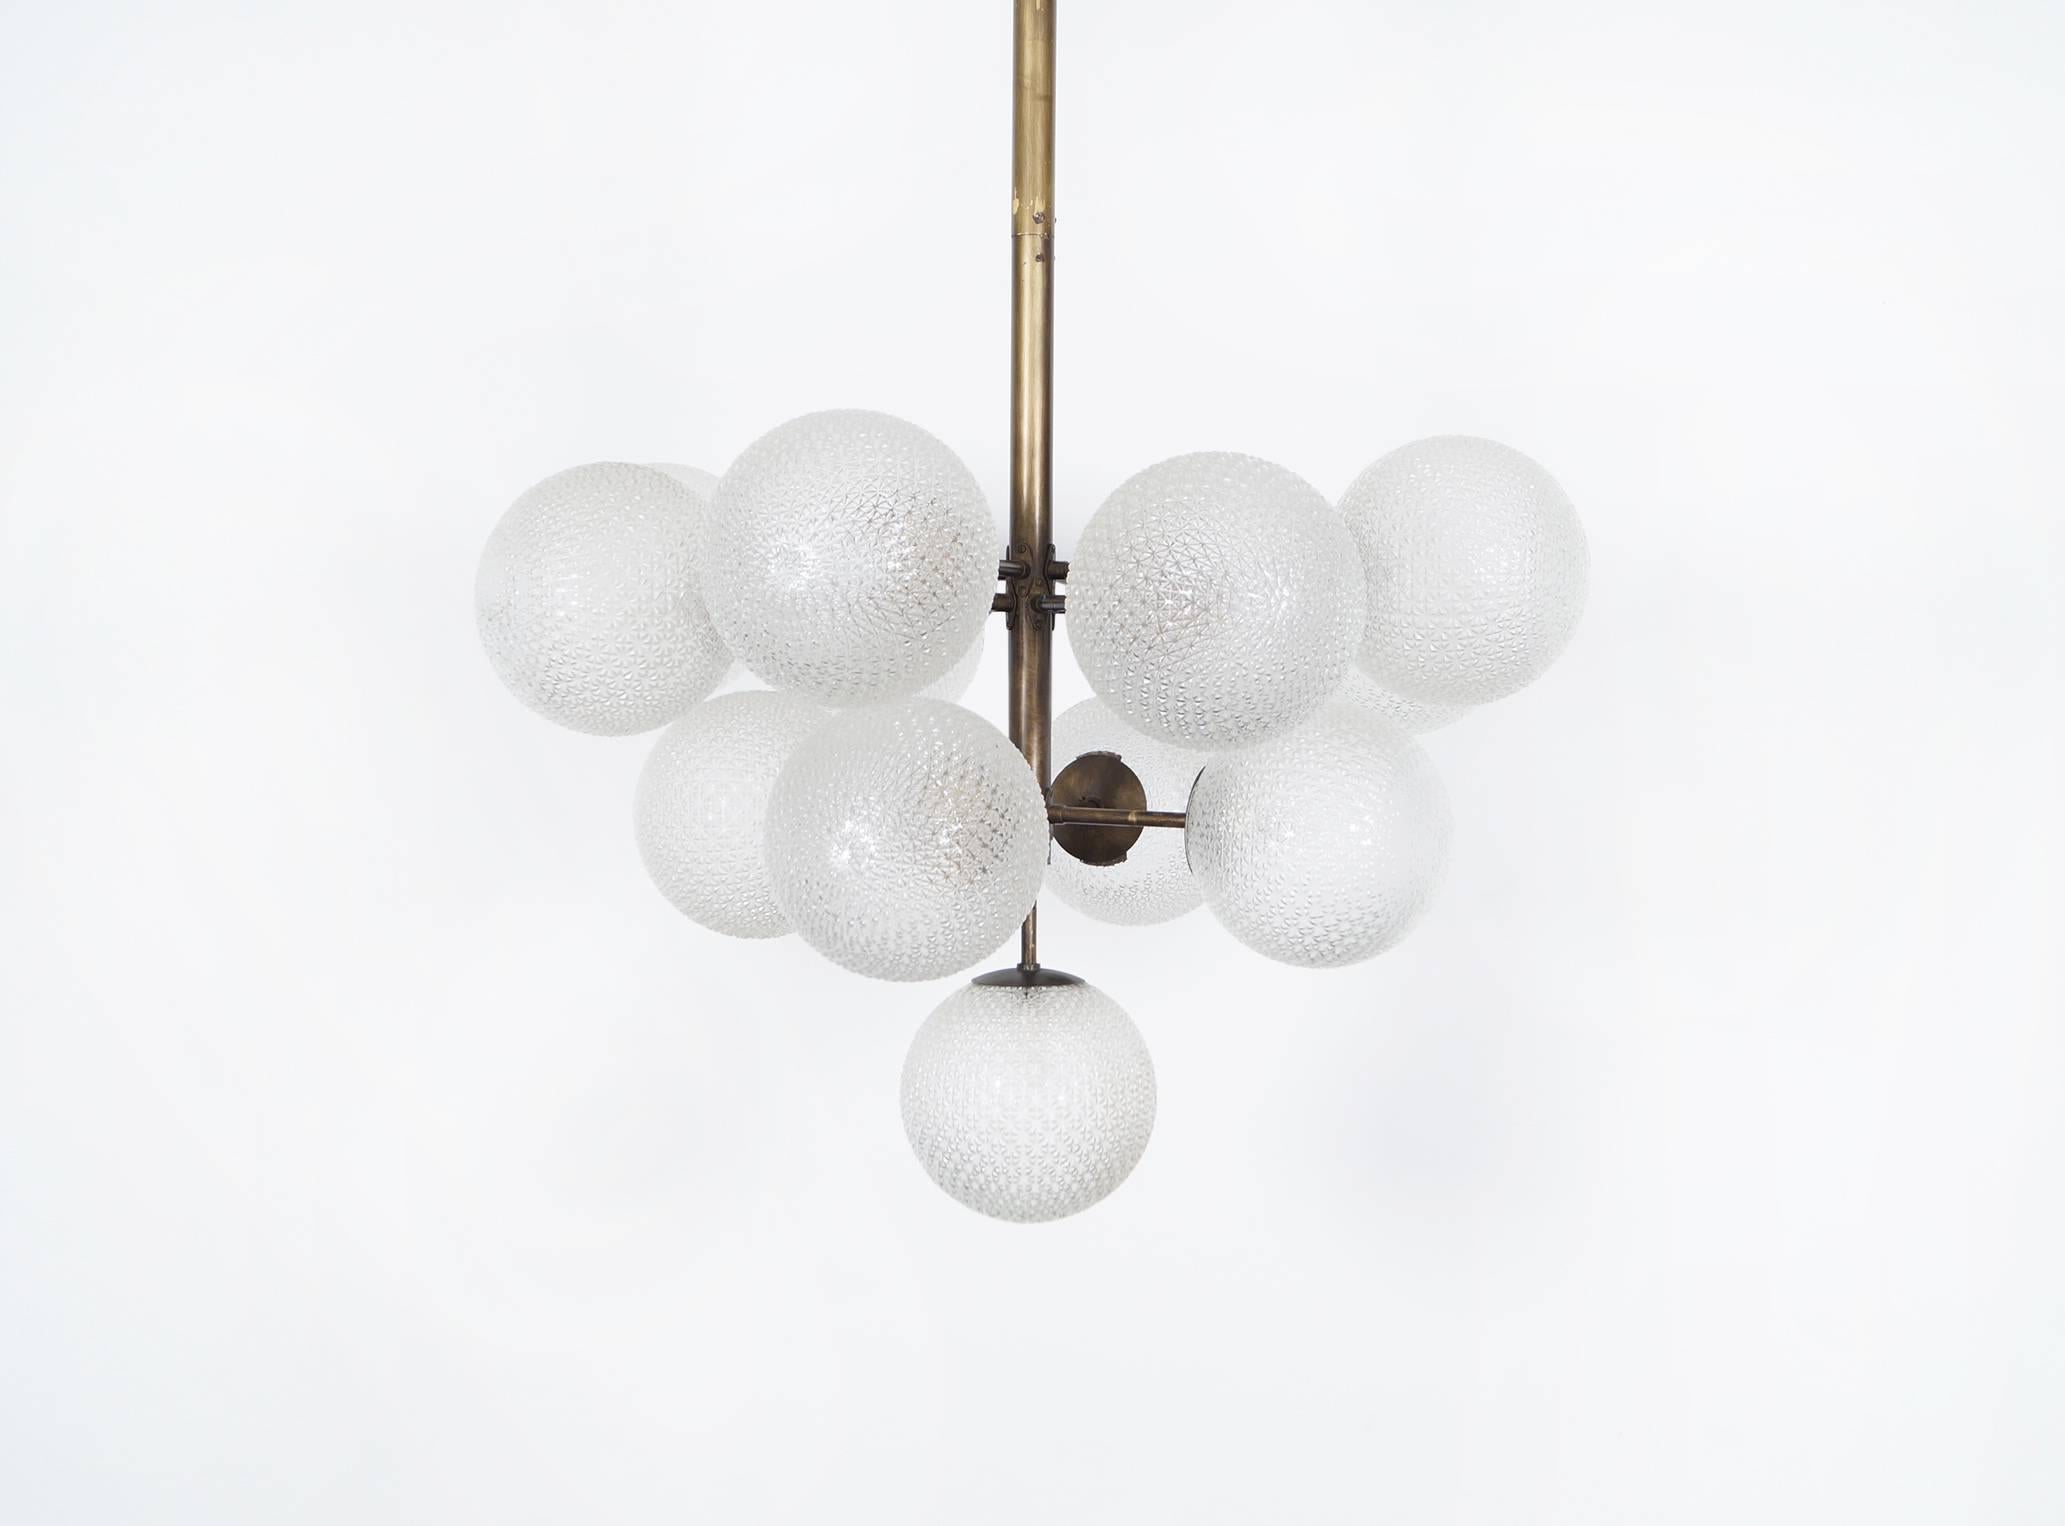 This amazing vintage glass globes chandelier features thirteen glass globes on a brass frame.